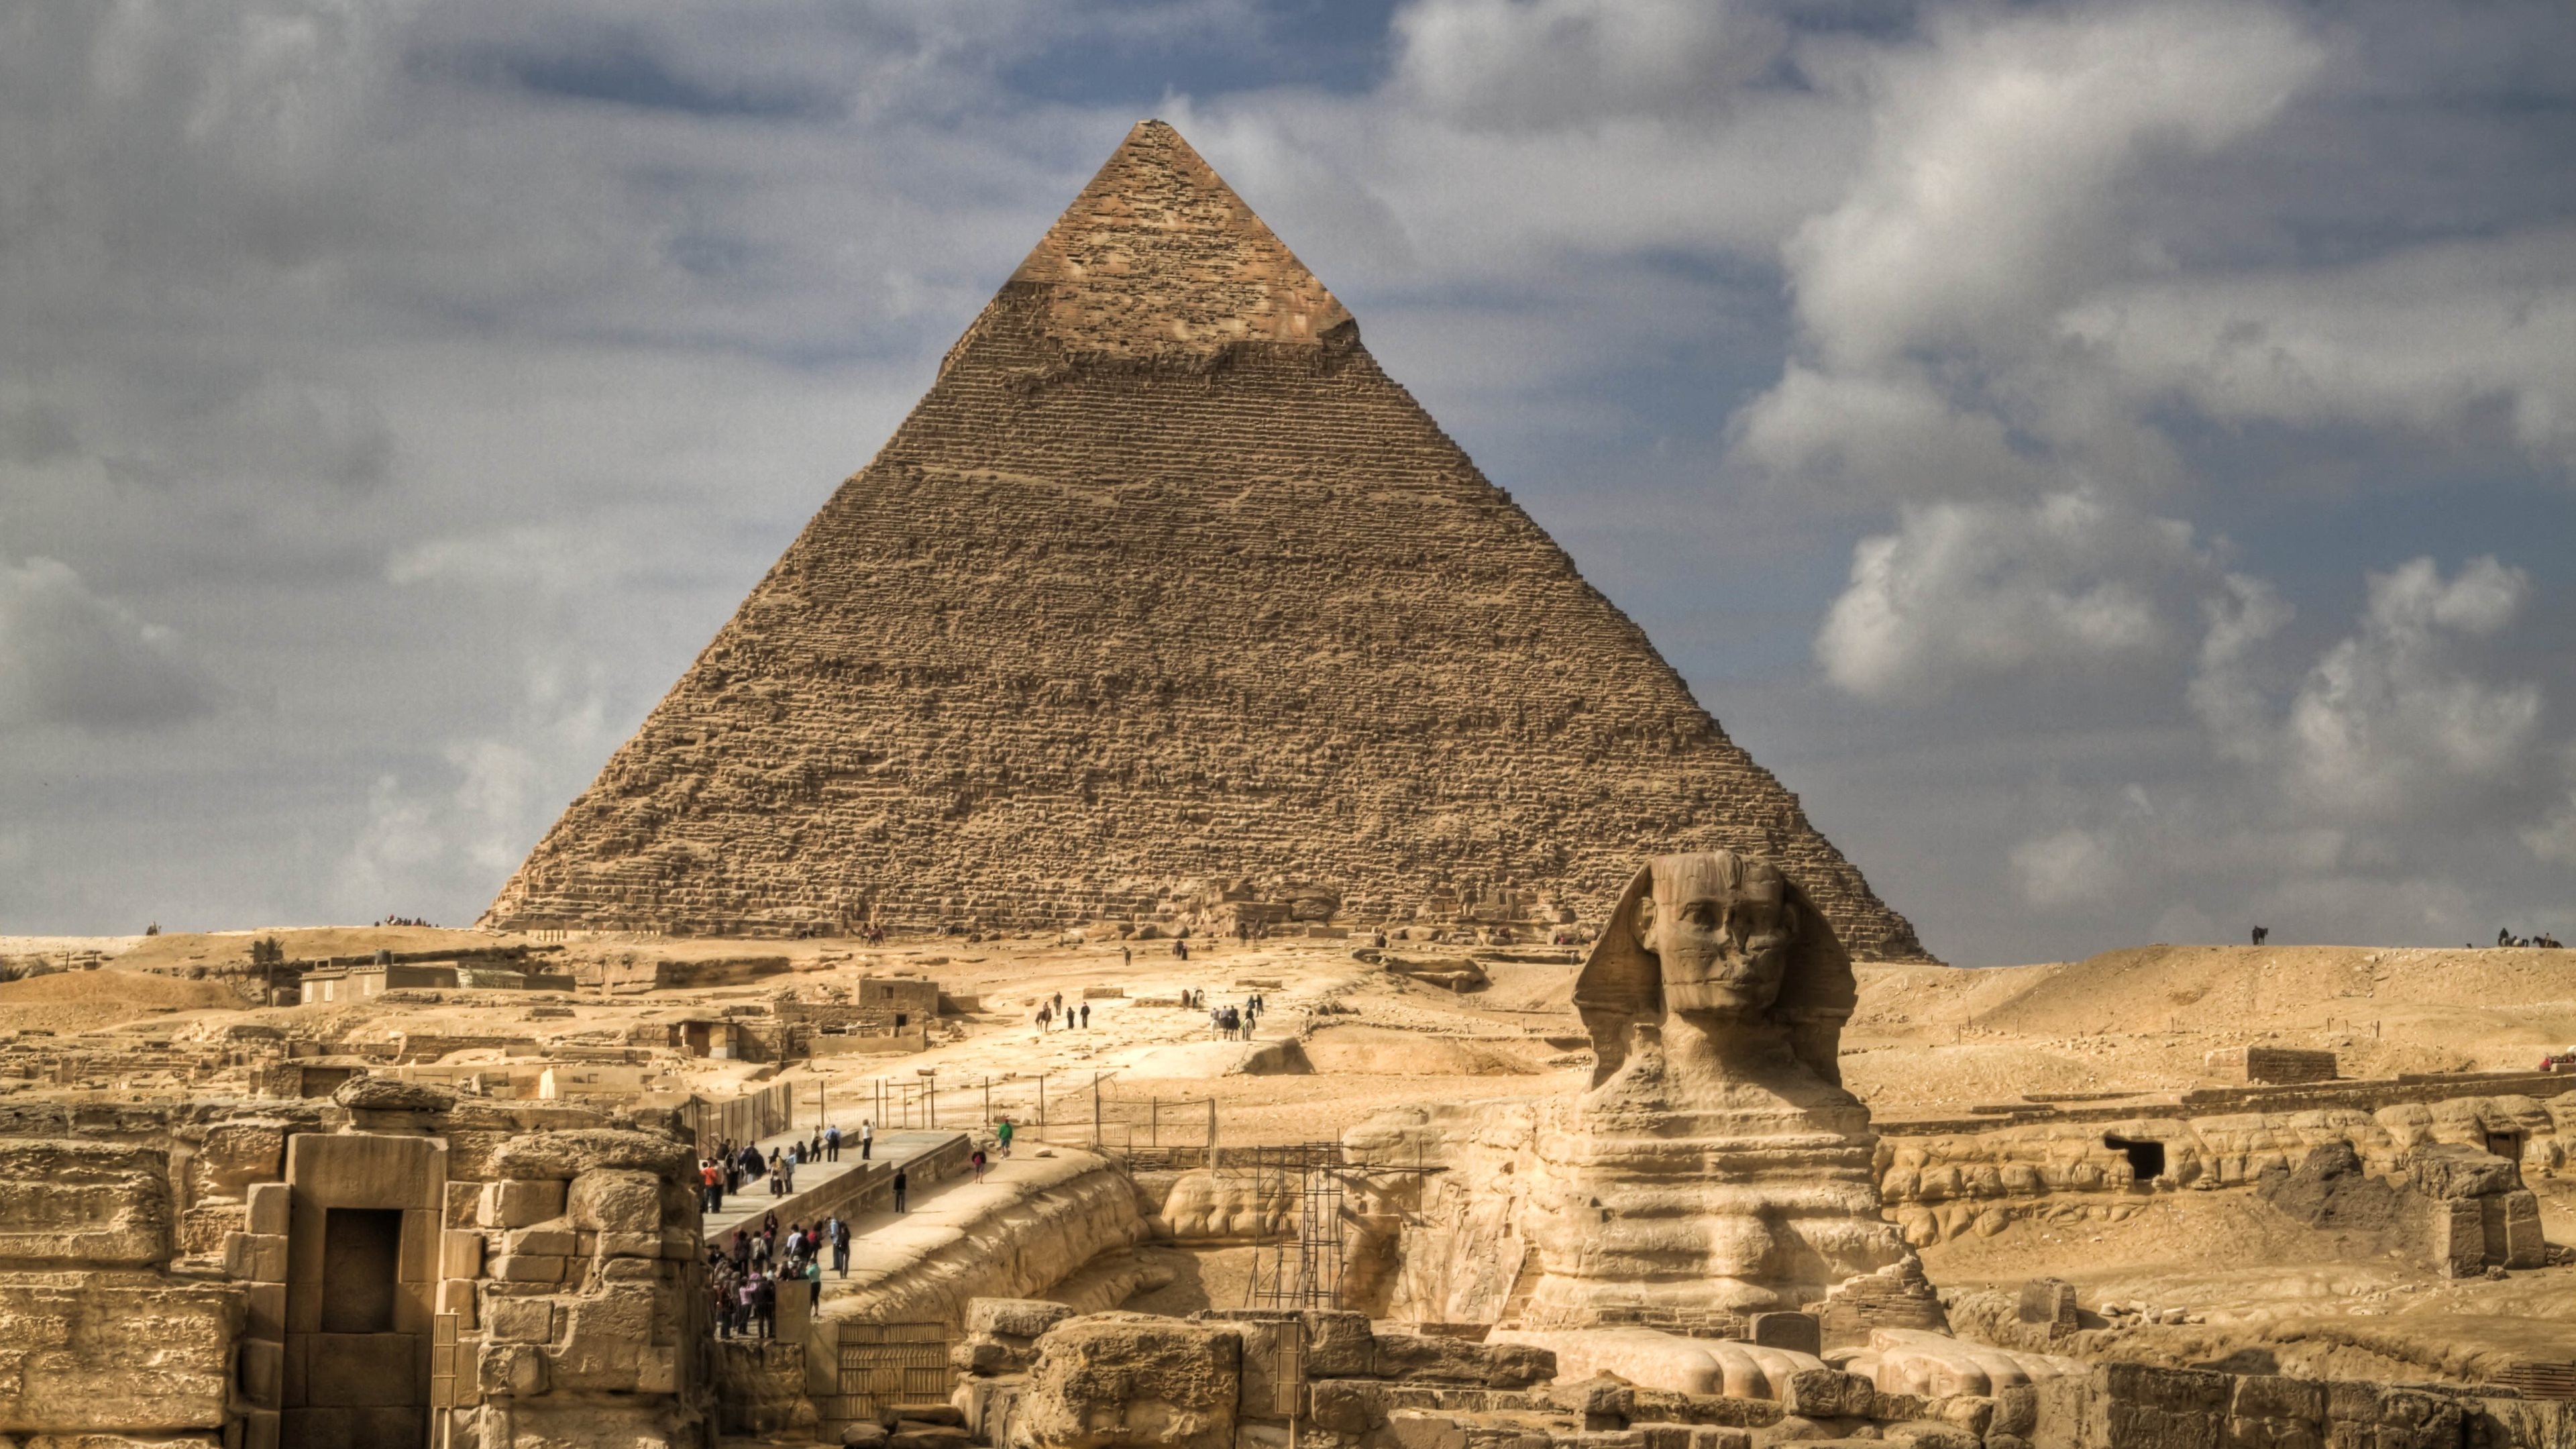 Pyramids of Egypt, Ancient wonders, Mysterious structures, Archaeological marvels, 3840x2160 4K Desktop